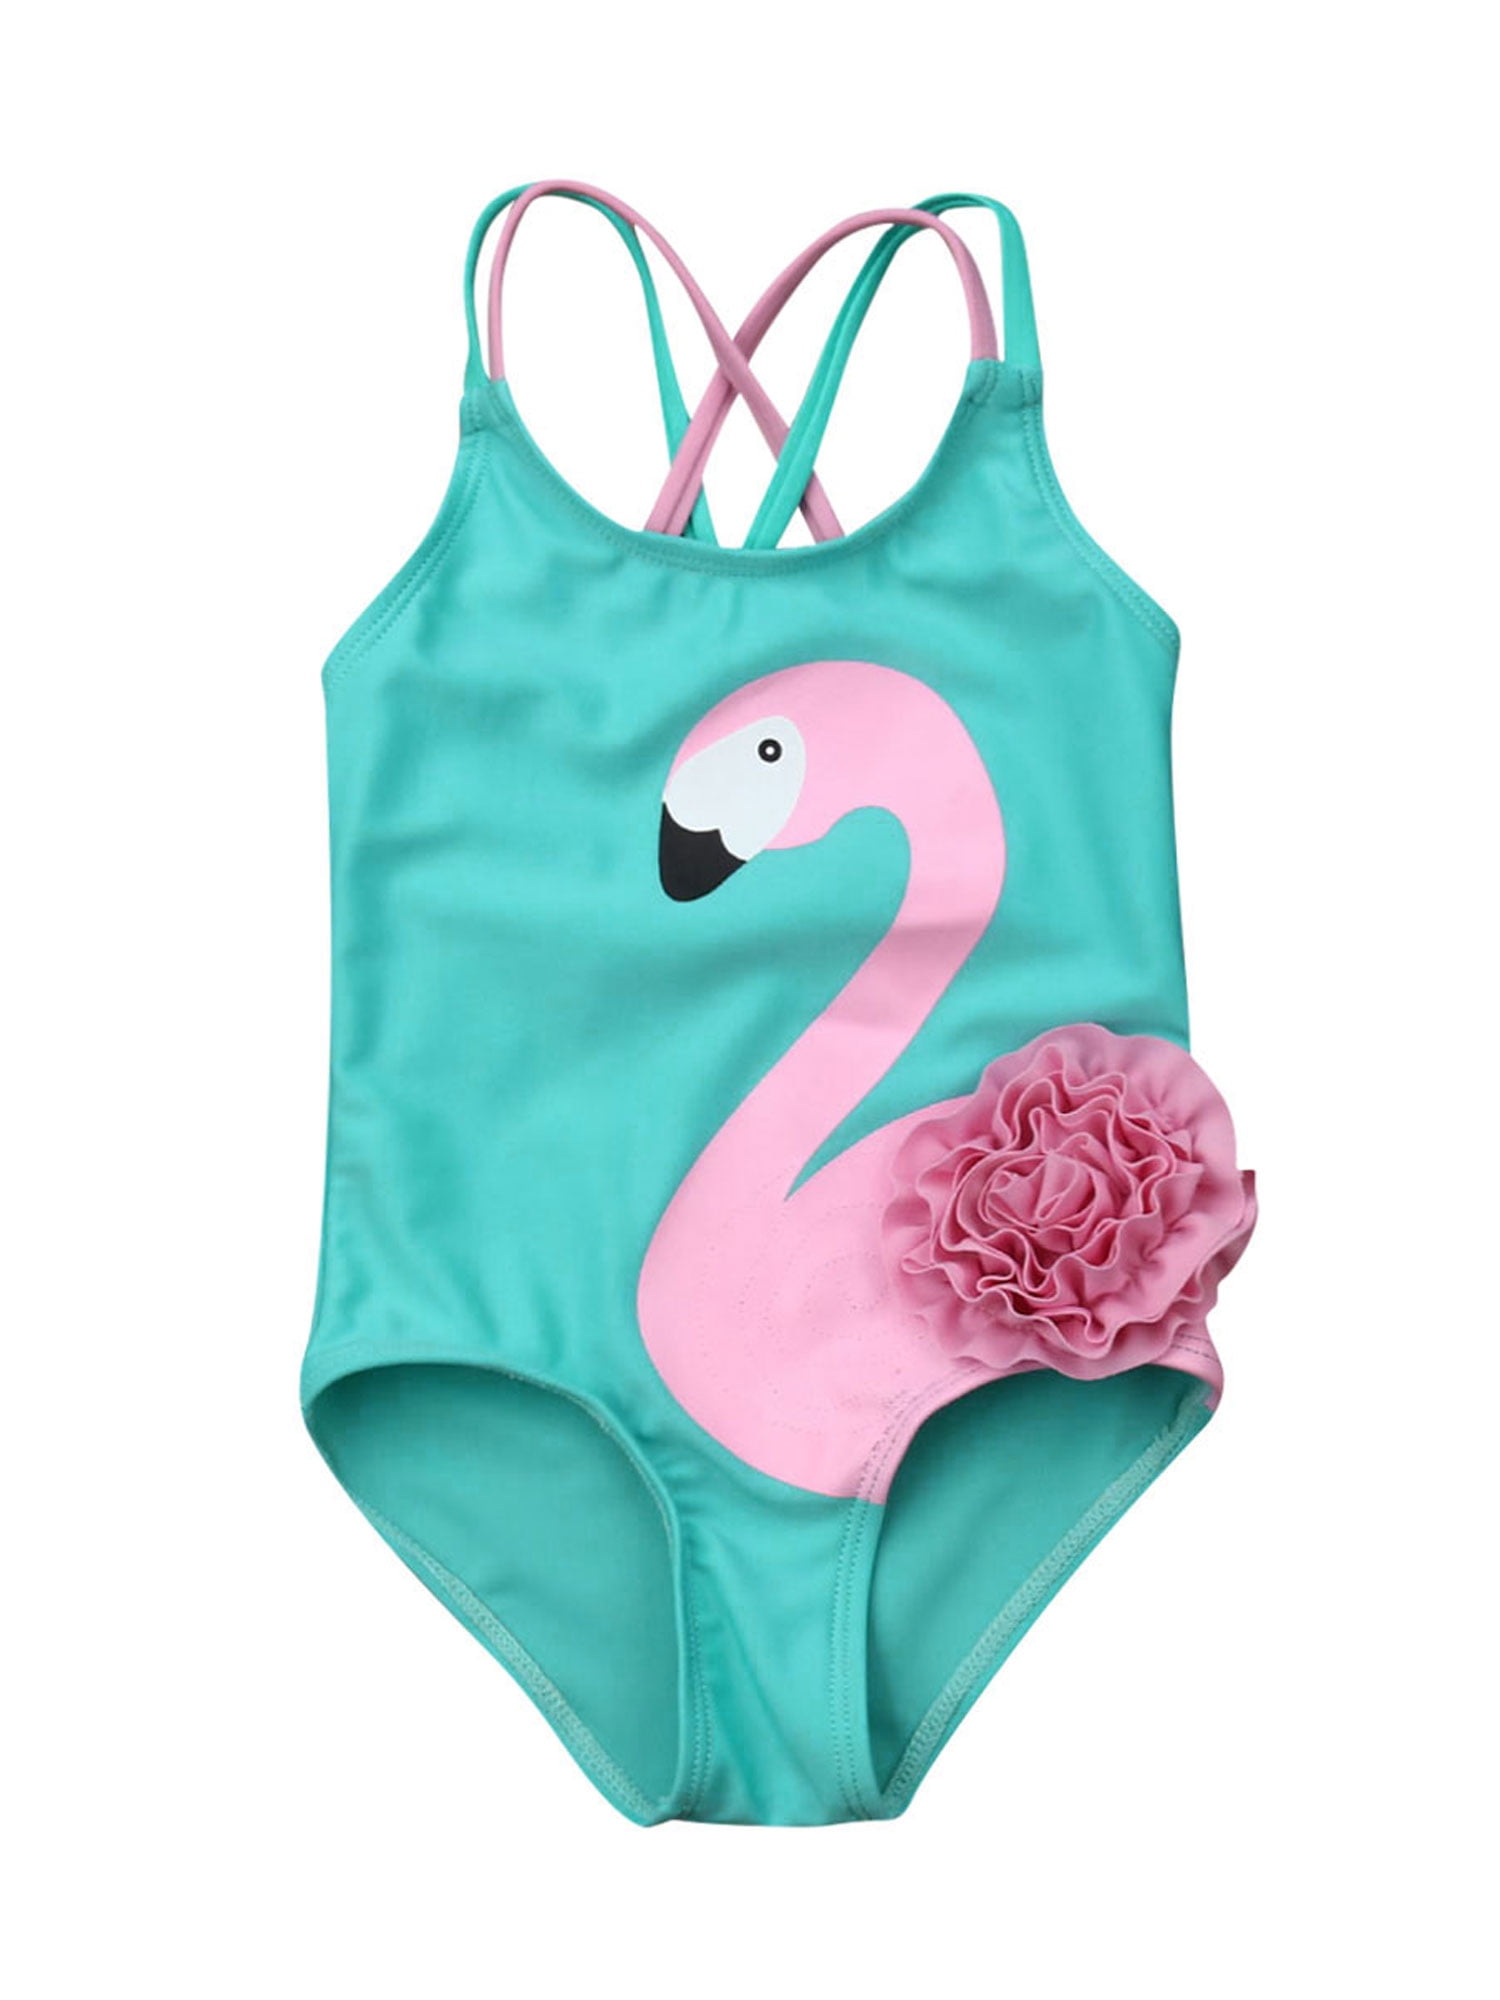 Carolilly Baby Girls One Piece Bathing Suit Flamingo Print Blue Striped Swimwear with Flying Shoulder and Fringes Multicolor from 12months-7years Children